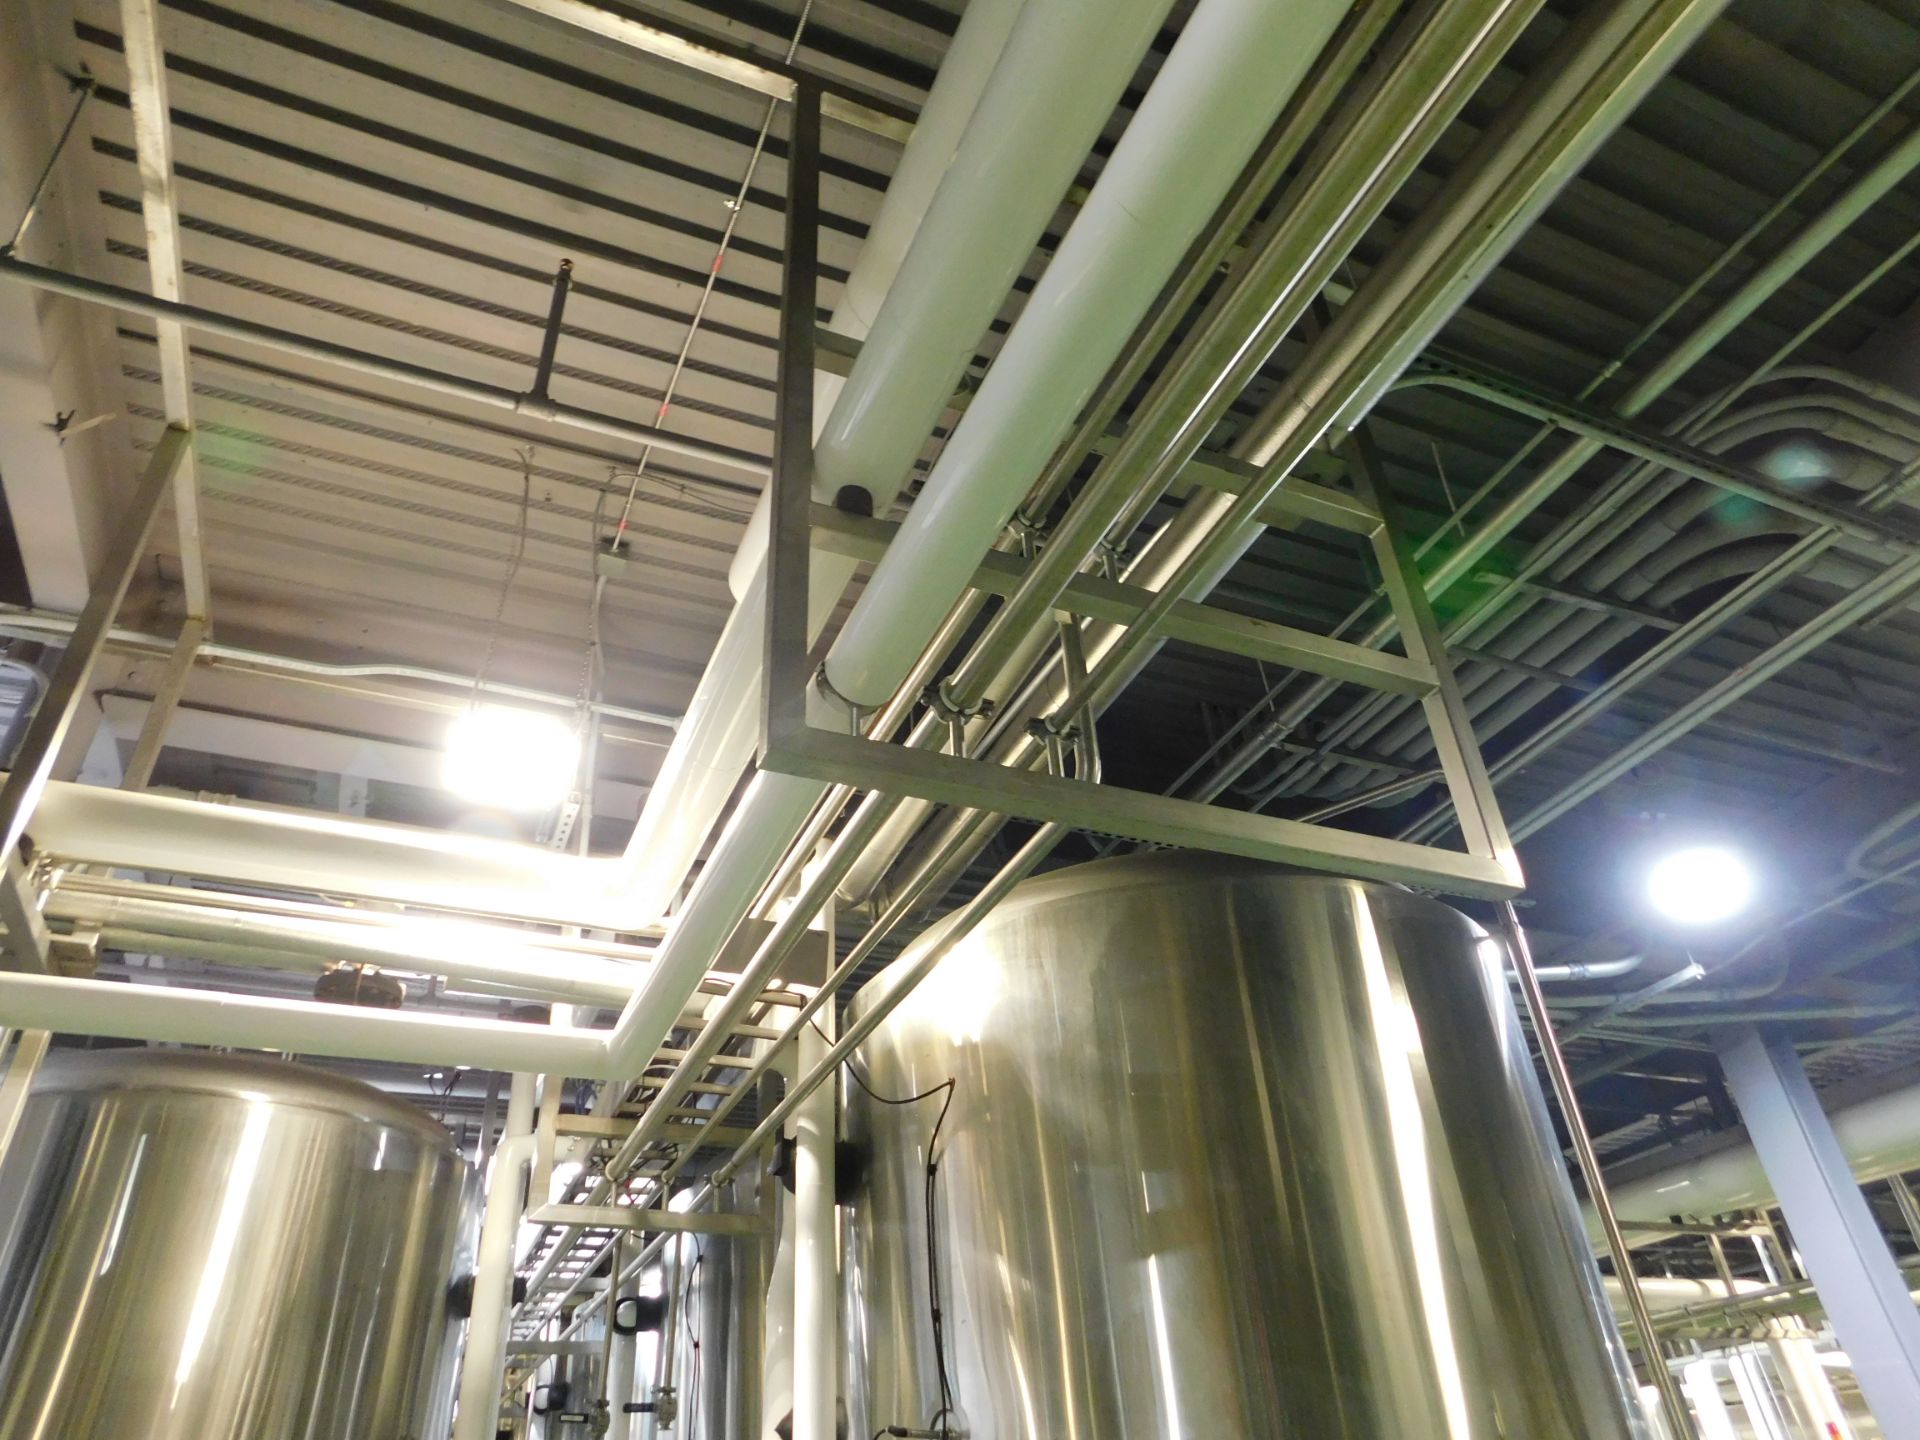 Stainless Steel Piping - Image 14 of 15